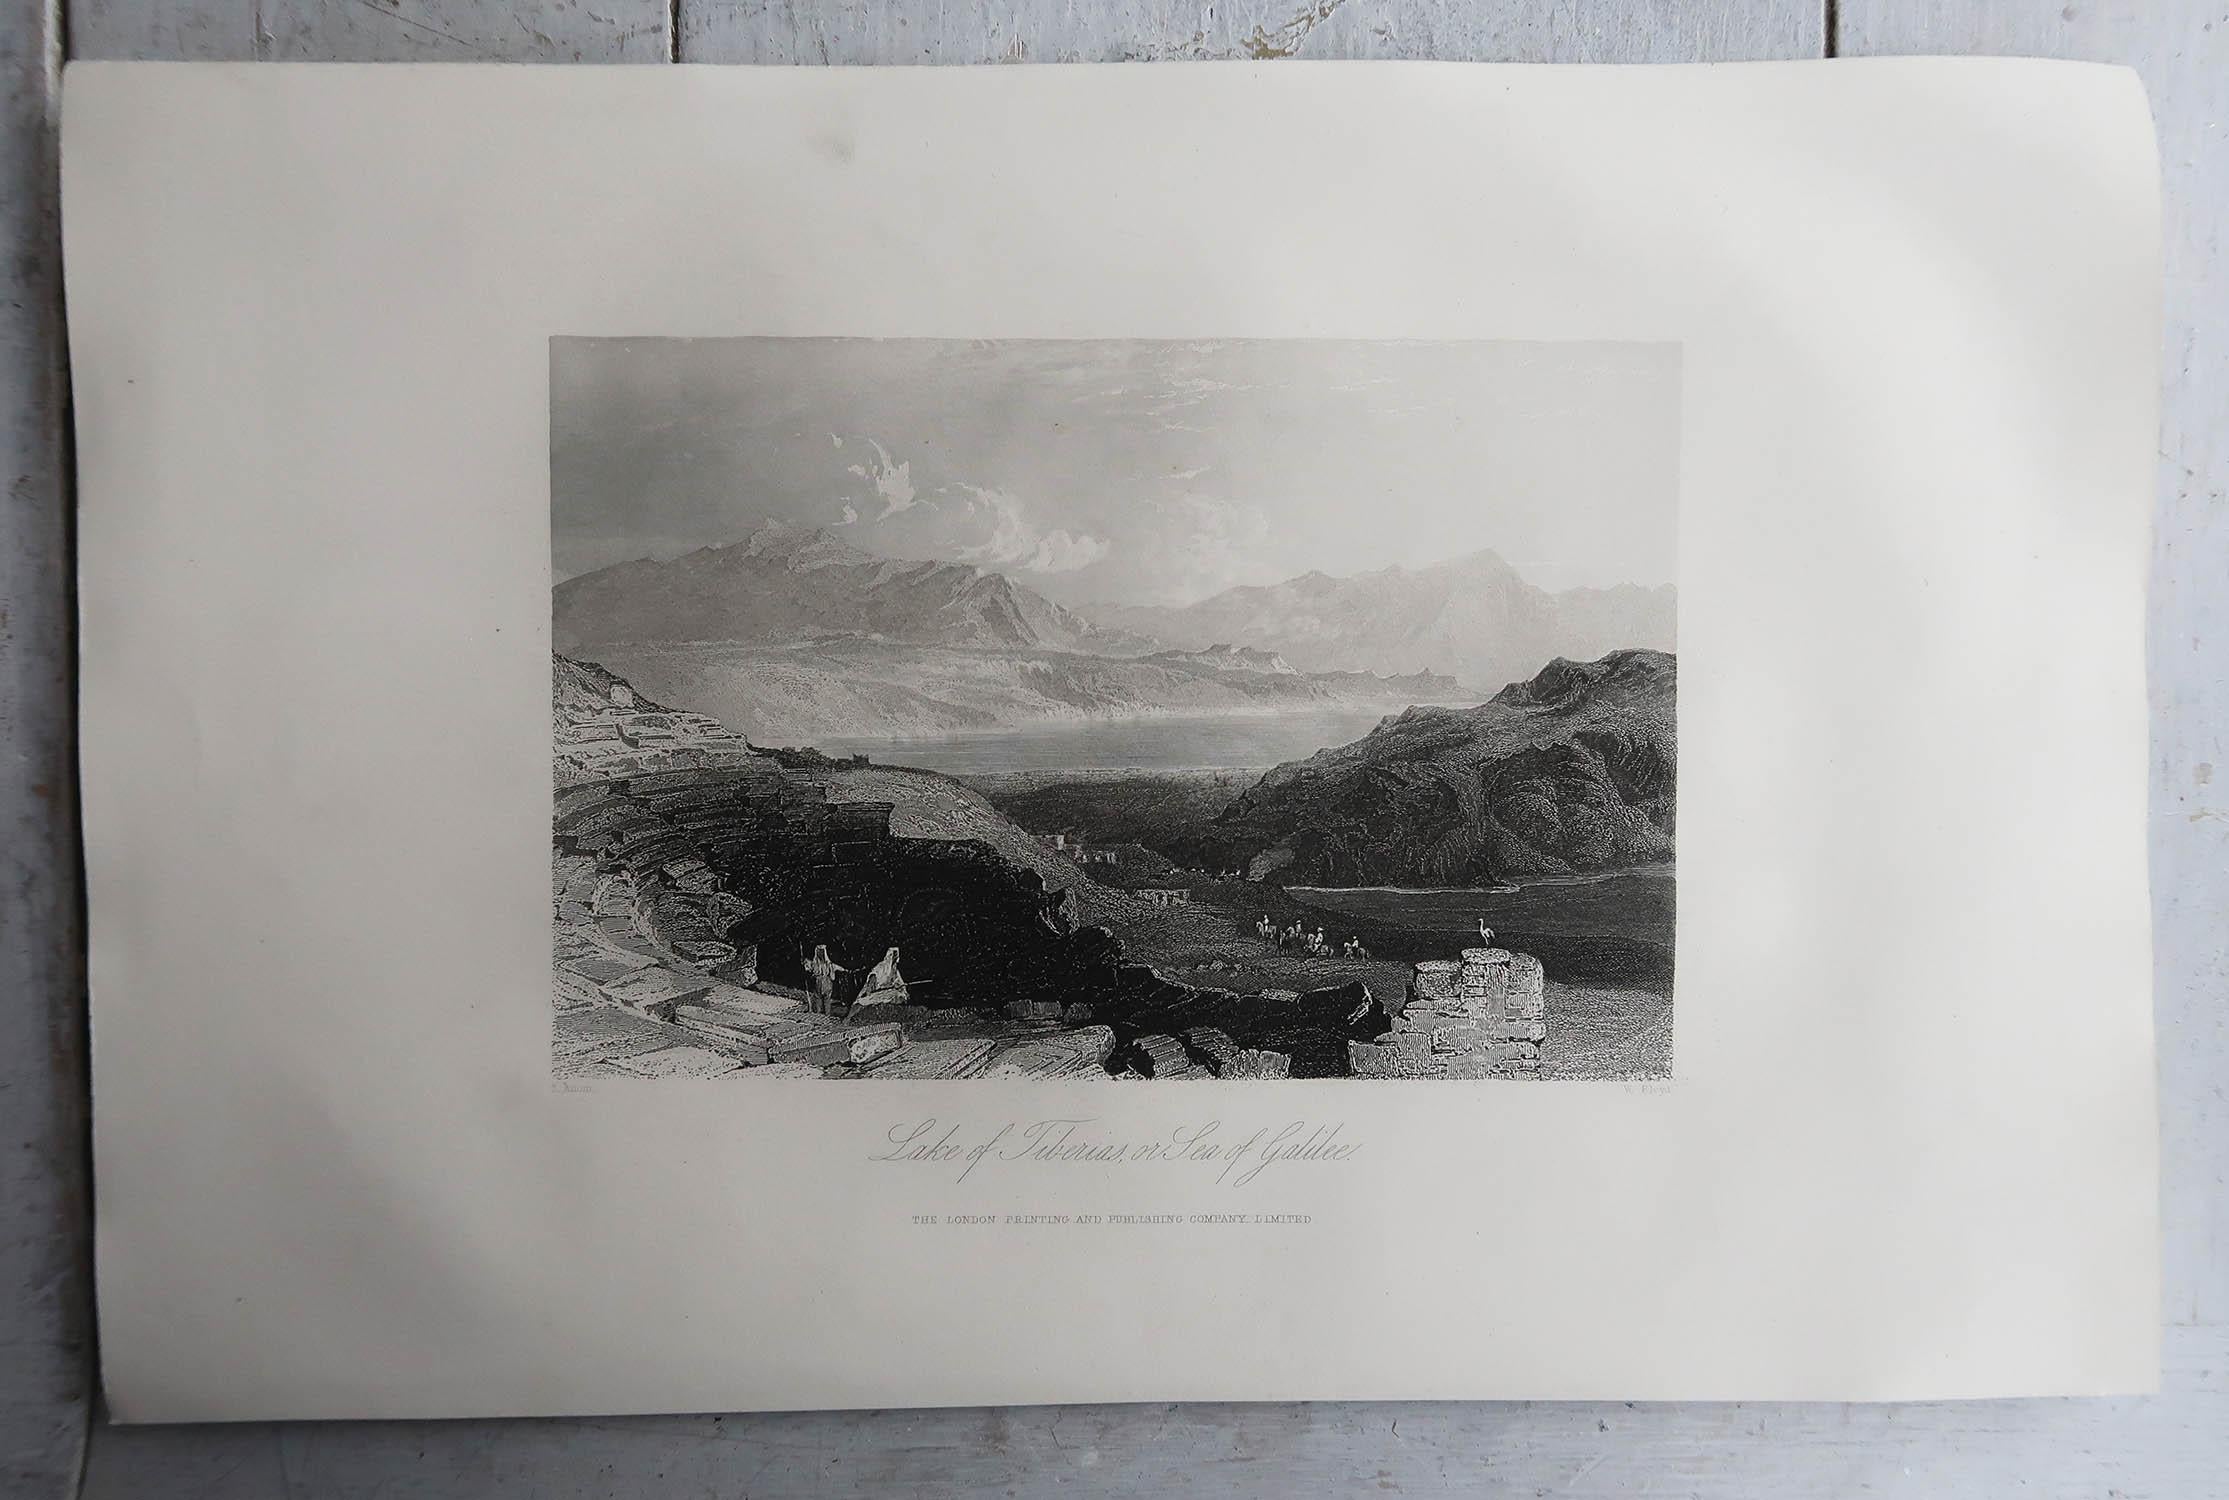 Other Set of 9 Original Antique Prints of the Levant / Holy Land /Middle East. C 1850 For Sale